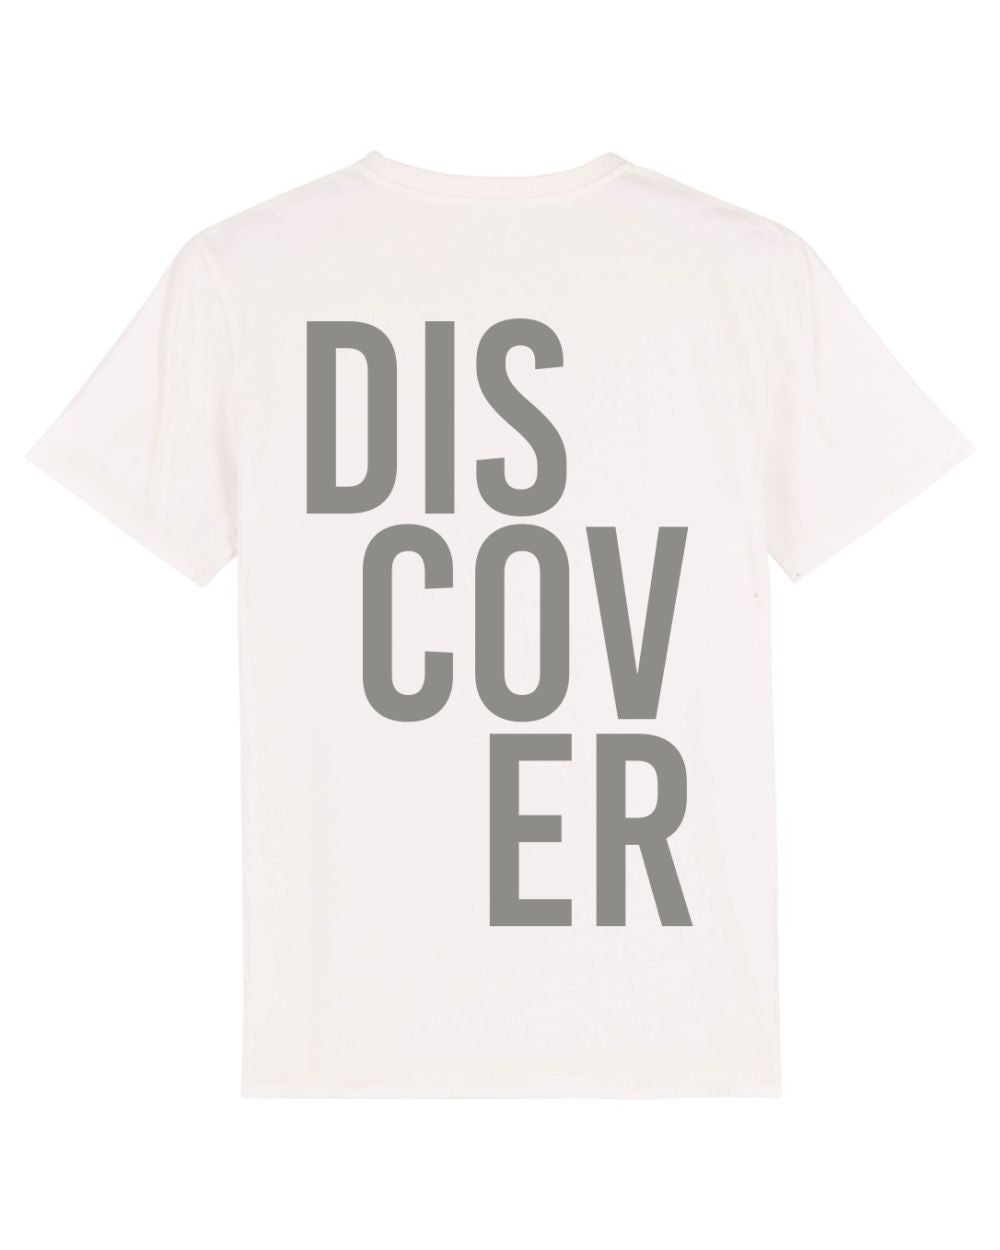 Discover T-Shirt